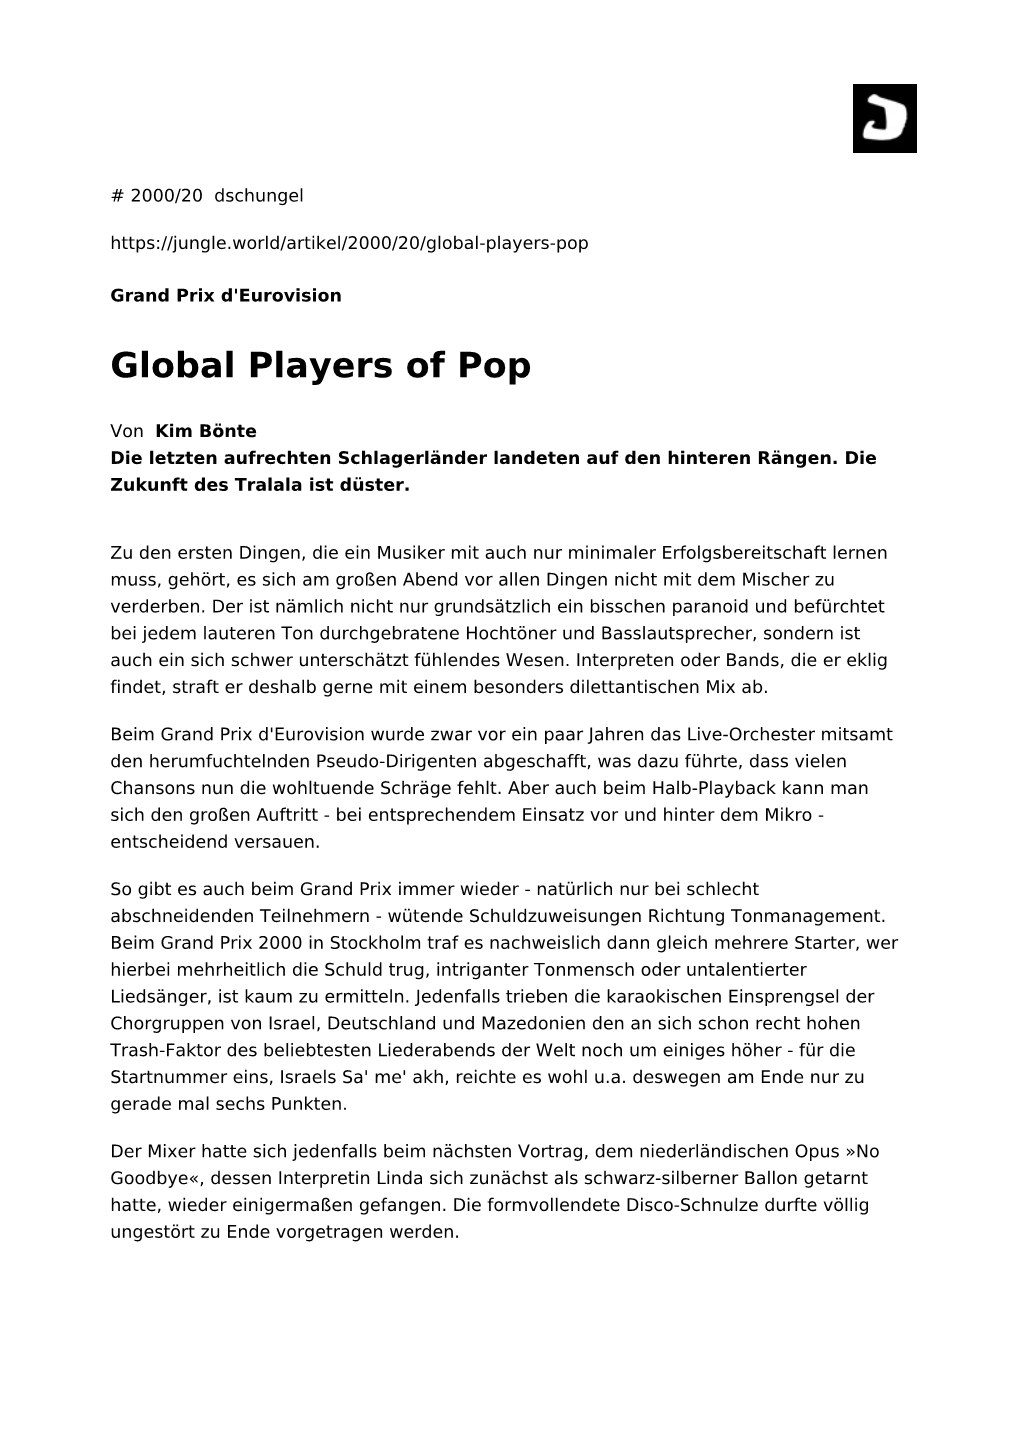 Global Players of Pop